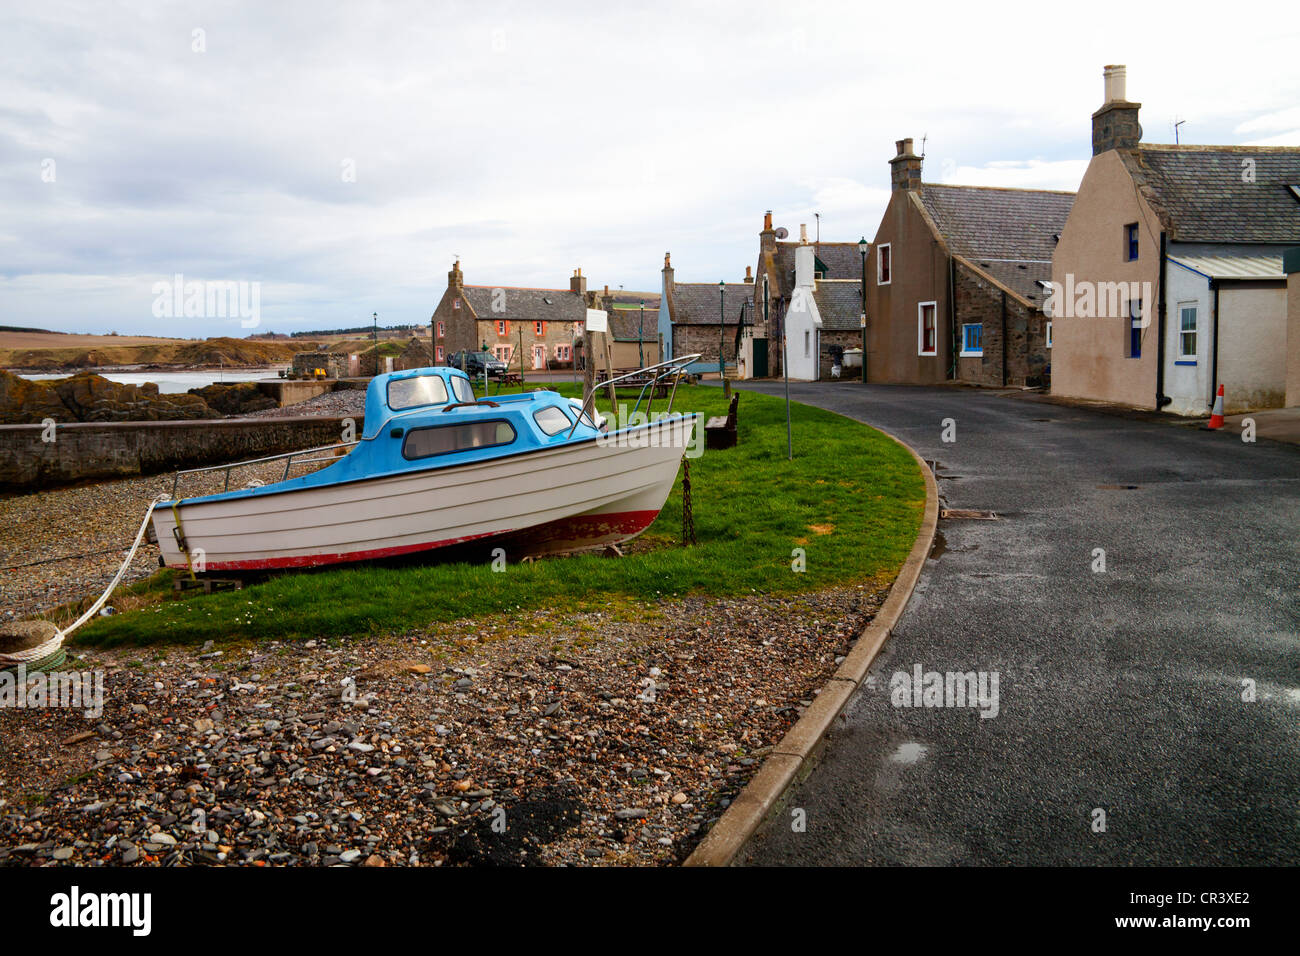 A boat moored to an old stone Bollard  in Sandend, Aberdeenshire, Scotland Stock Photo